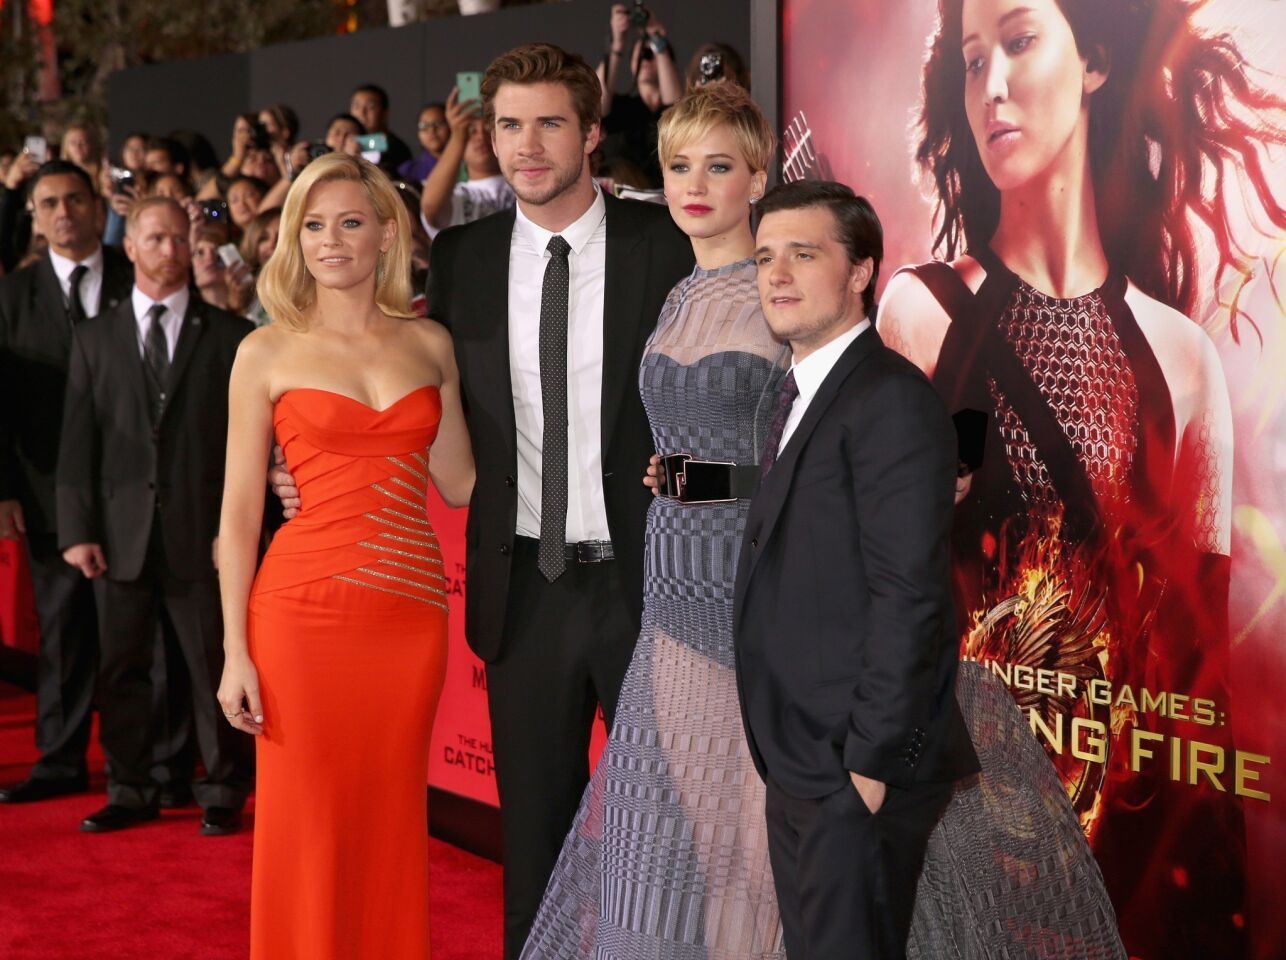 'The Hunger Games: Catching Fire' premiere